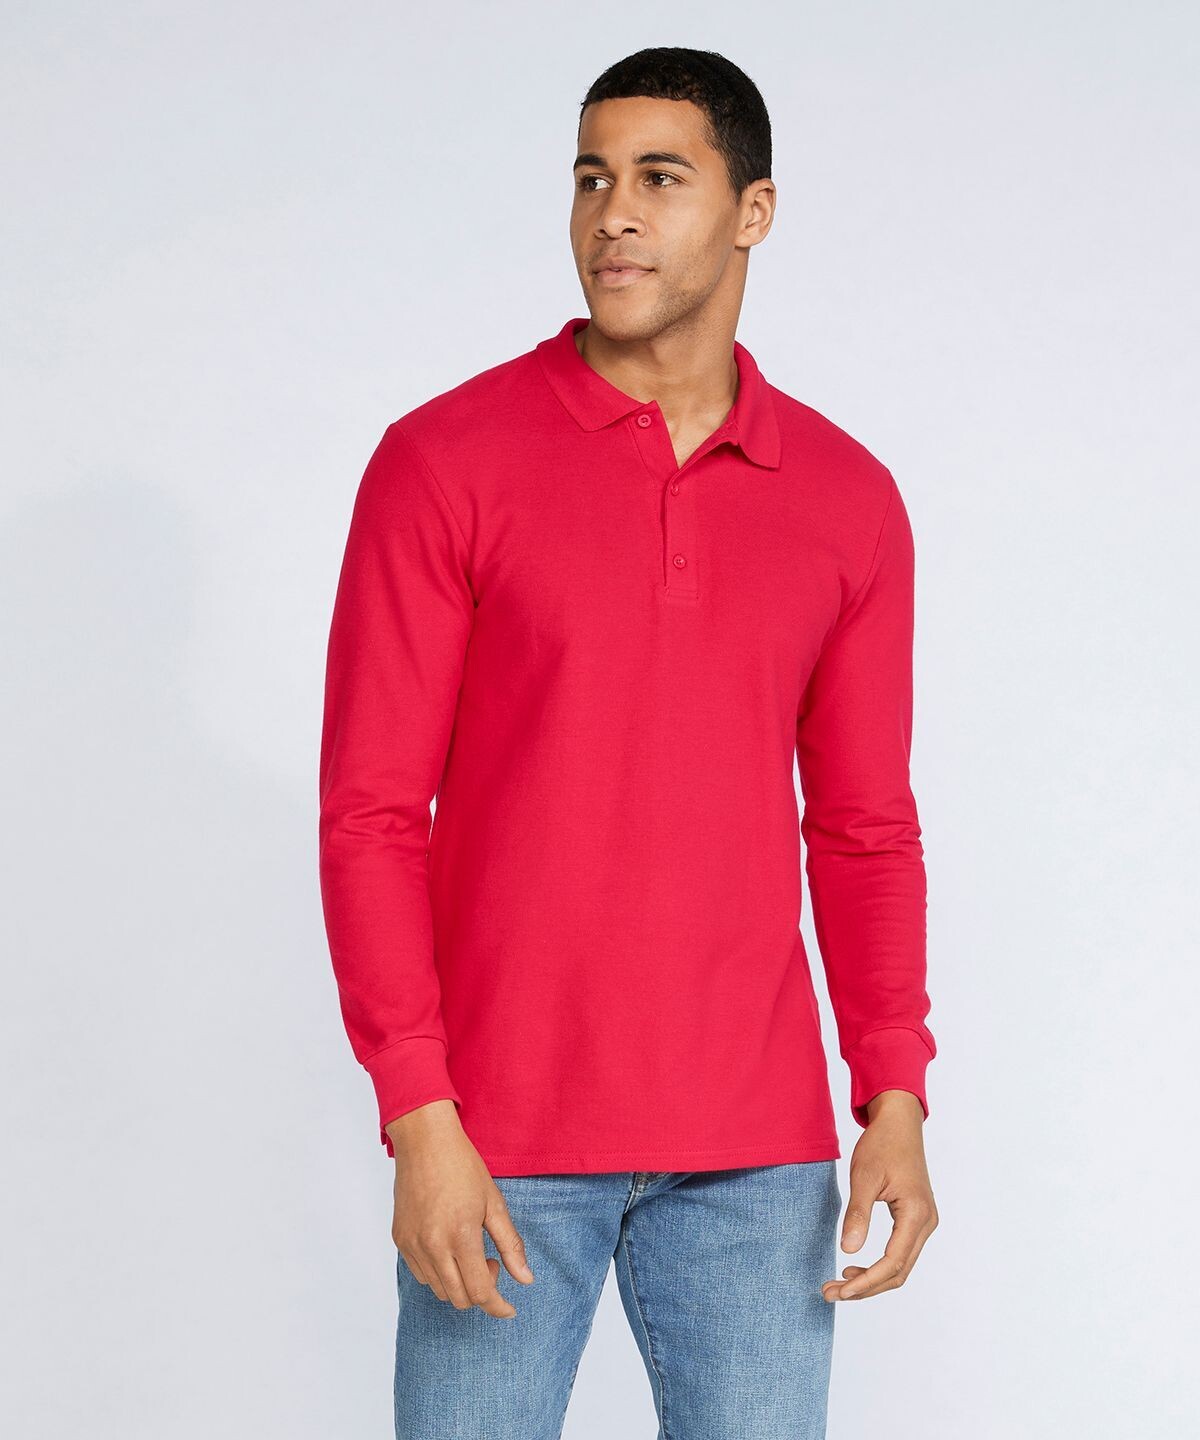 Gildan Premium Cotton Long Sleeve Red Polo Shirt, Sizes & Colours Available: Red Size XL